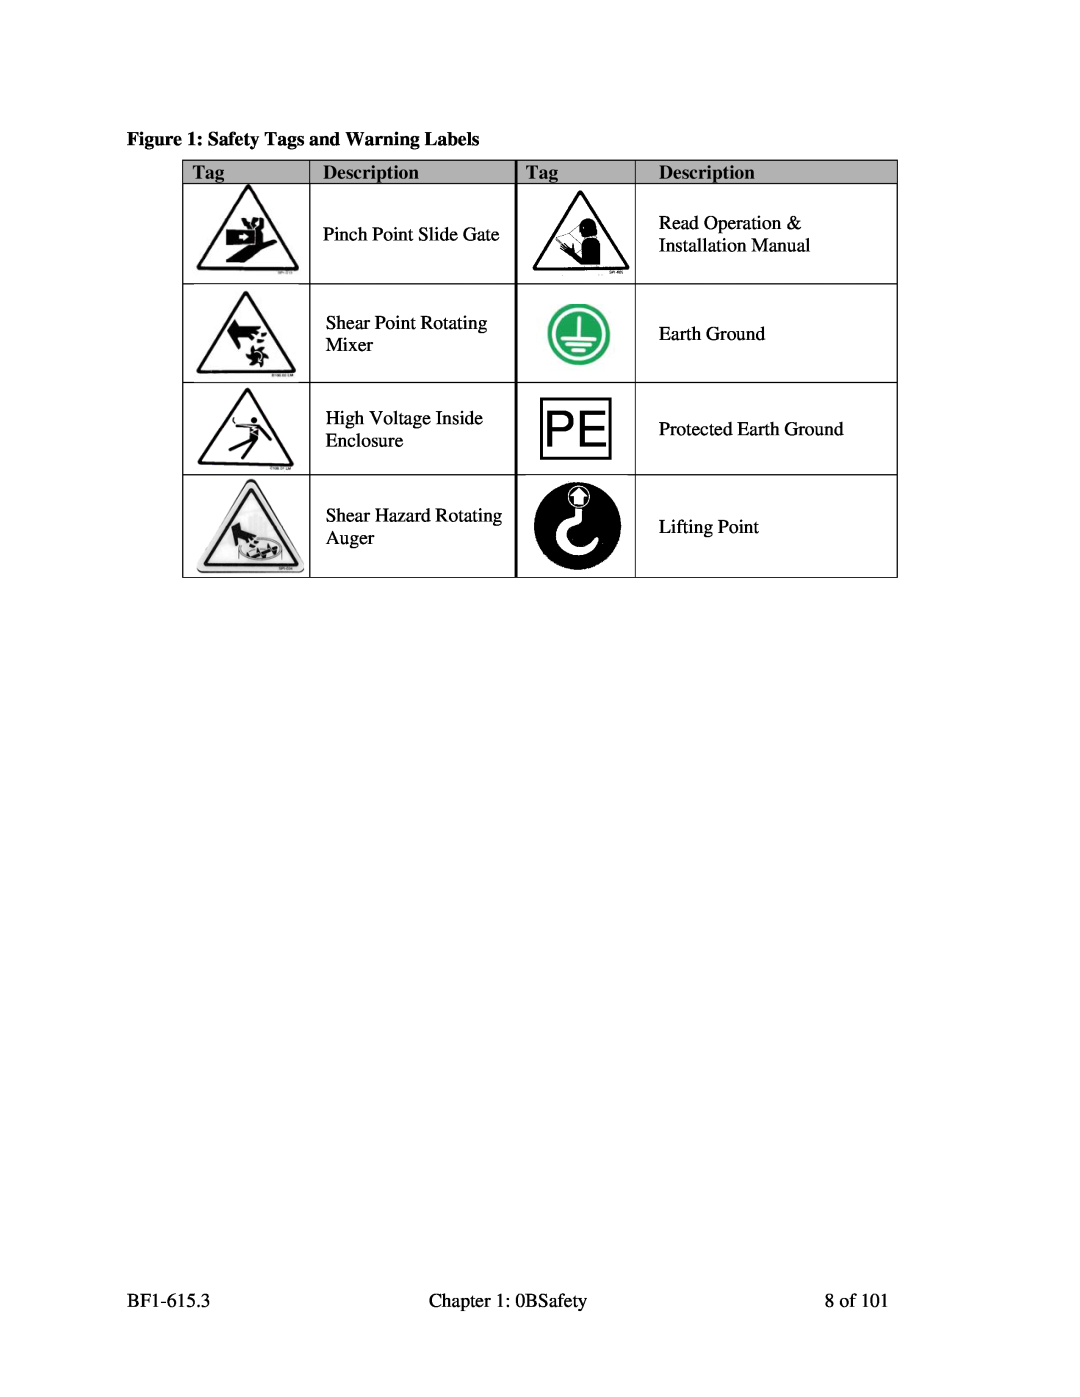 Mitsubishi Electronics 882.00273.00 specifications Safety Tags and Warning Labels, Description 